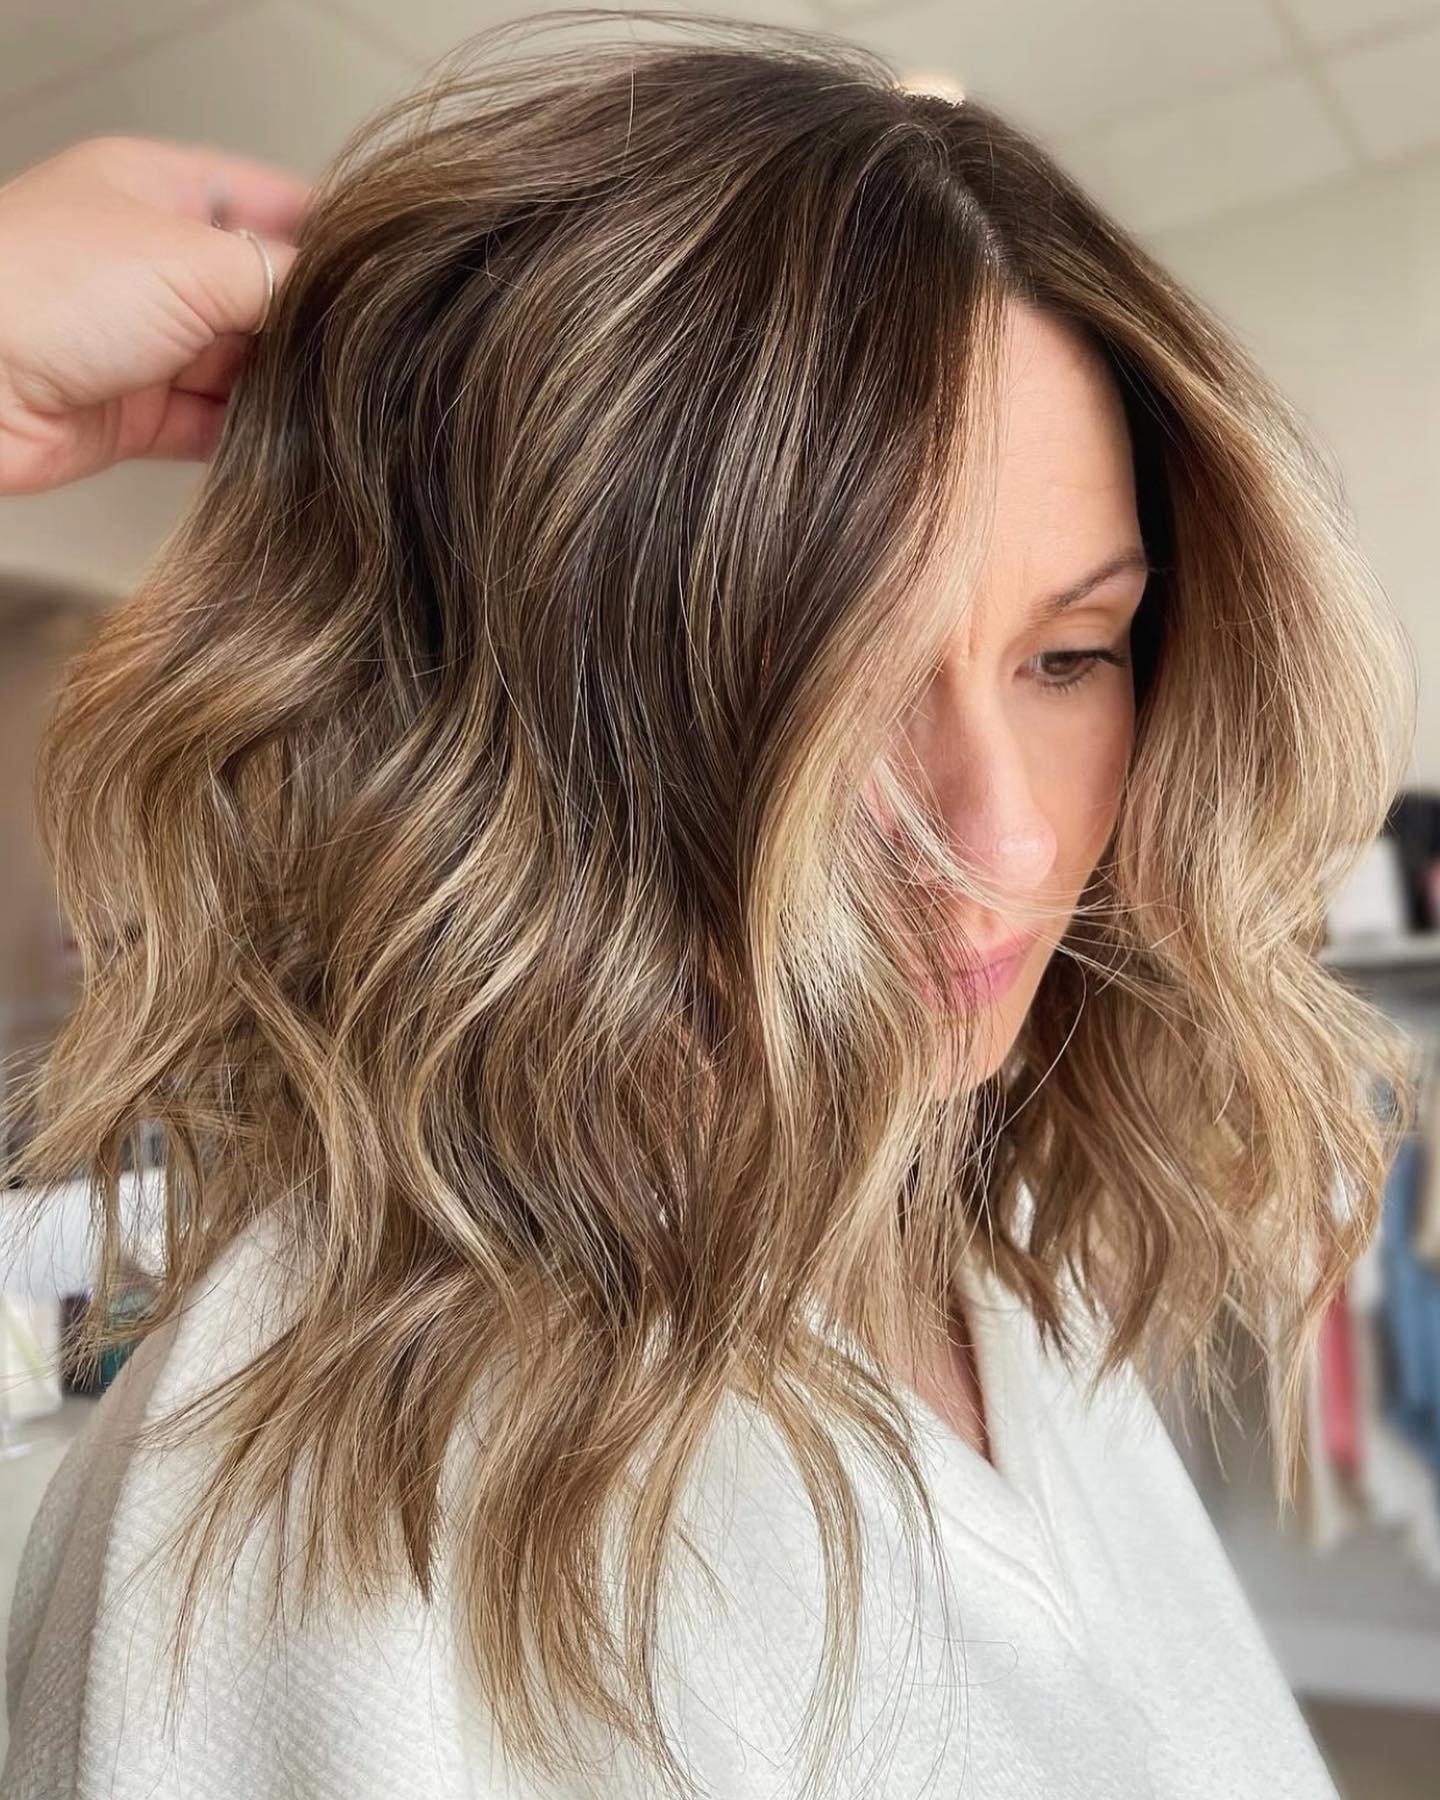 In looove with this cut, color, volume, basically everything 🤤

Hair by Tori

Join D3VIP! An easy way to earn points to redeem on products. Ask about it at your next appointment 😉

To make an appointment, give us a call at 517.225.5958 or book onli